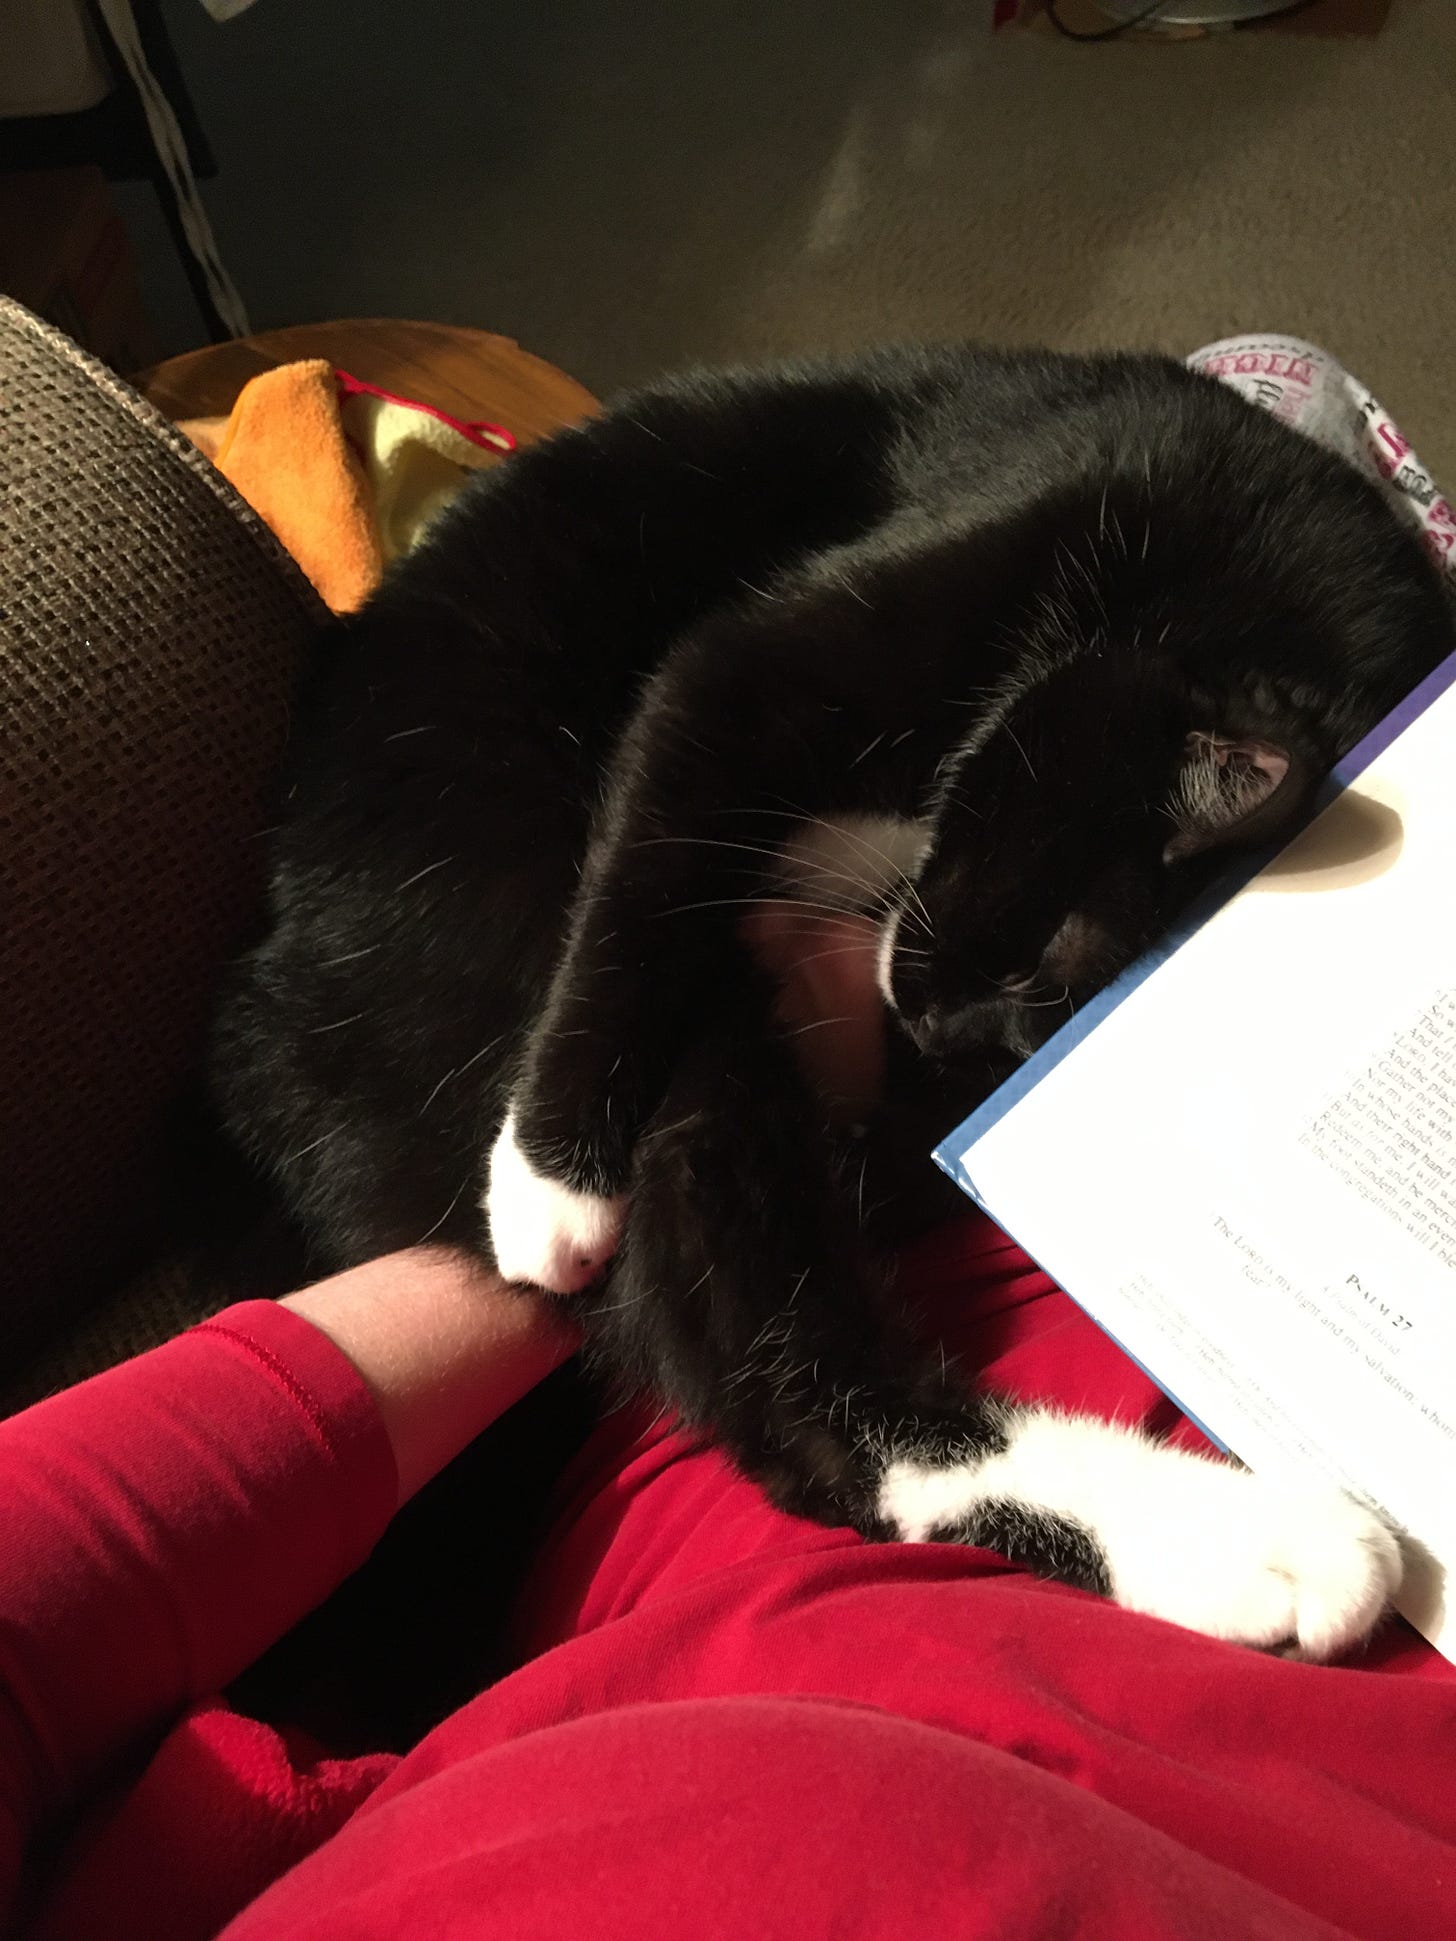 A black cat with white chin and paws curls up next to a large book with a person's hand against her belly.